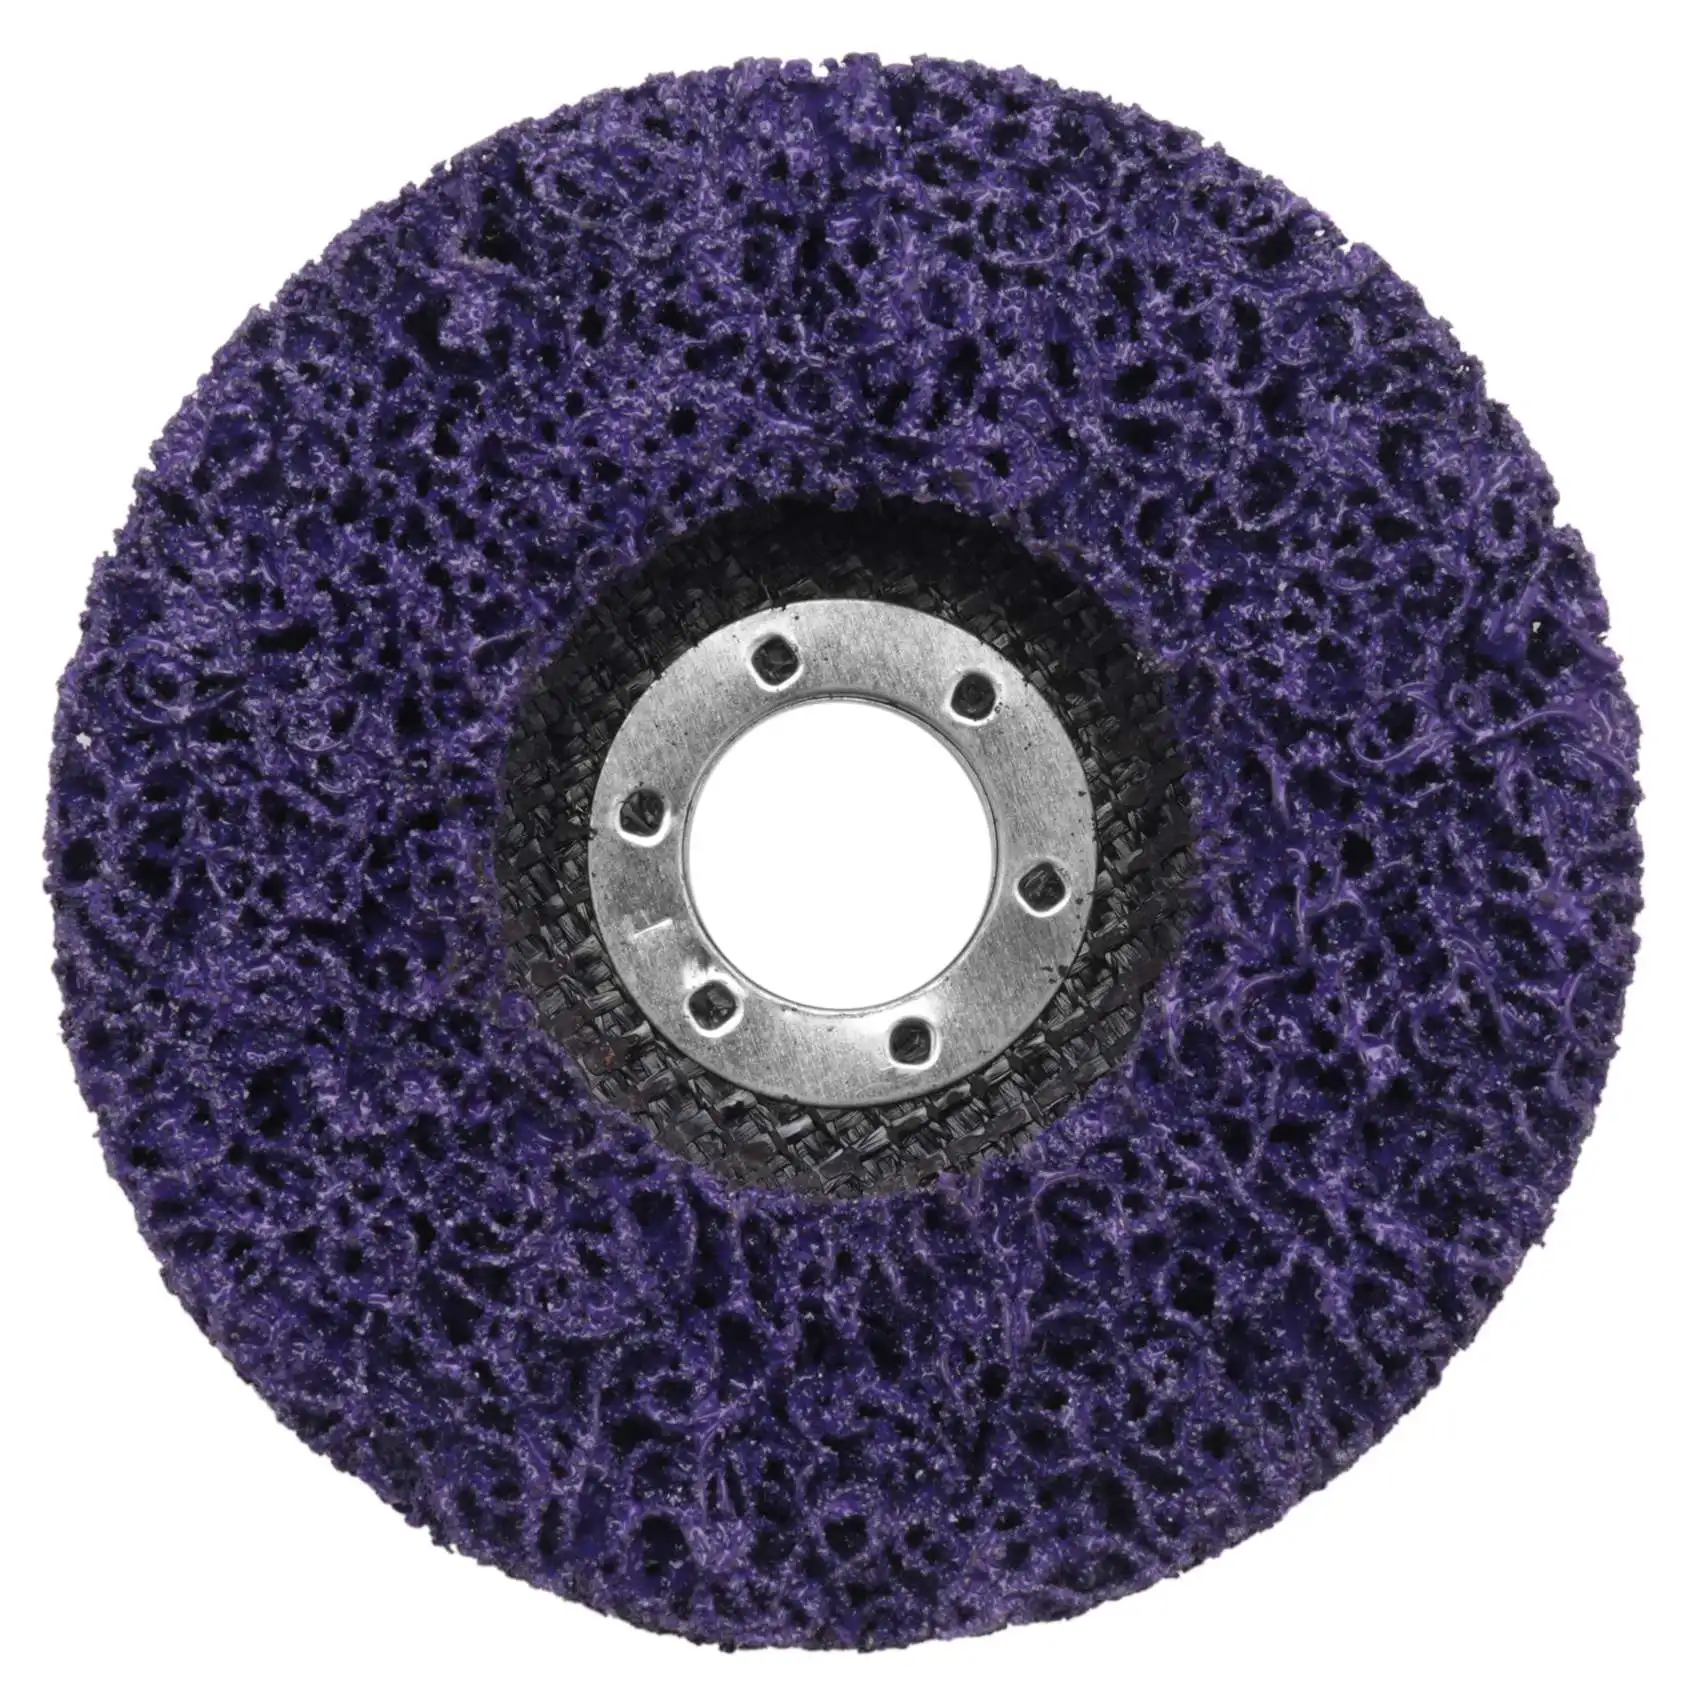 

5 Pack- 4 1/2Inch(115mm) x 7/8Inch Stripping and Clean Disc for Angle Grinders -Removes Rust,Strips Paint,Cleans Welds